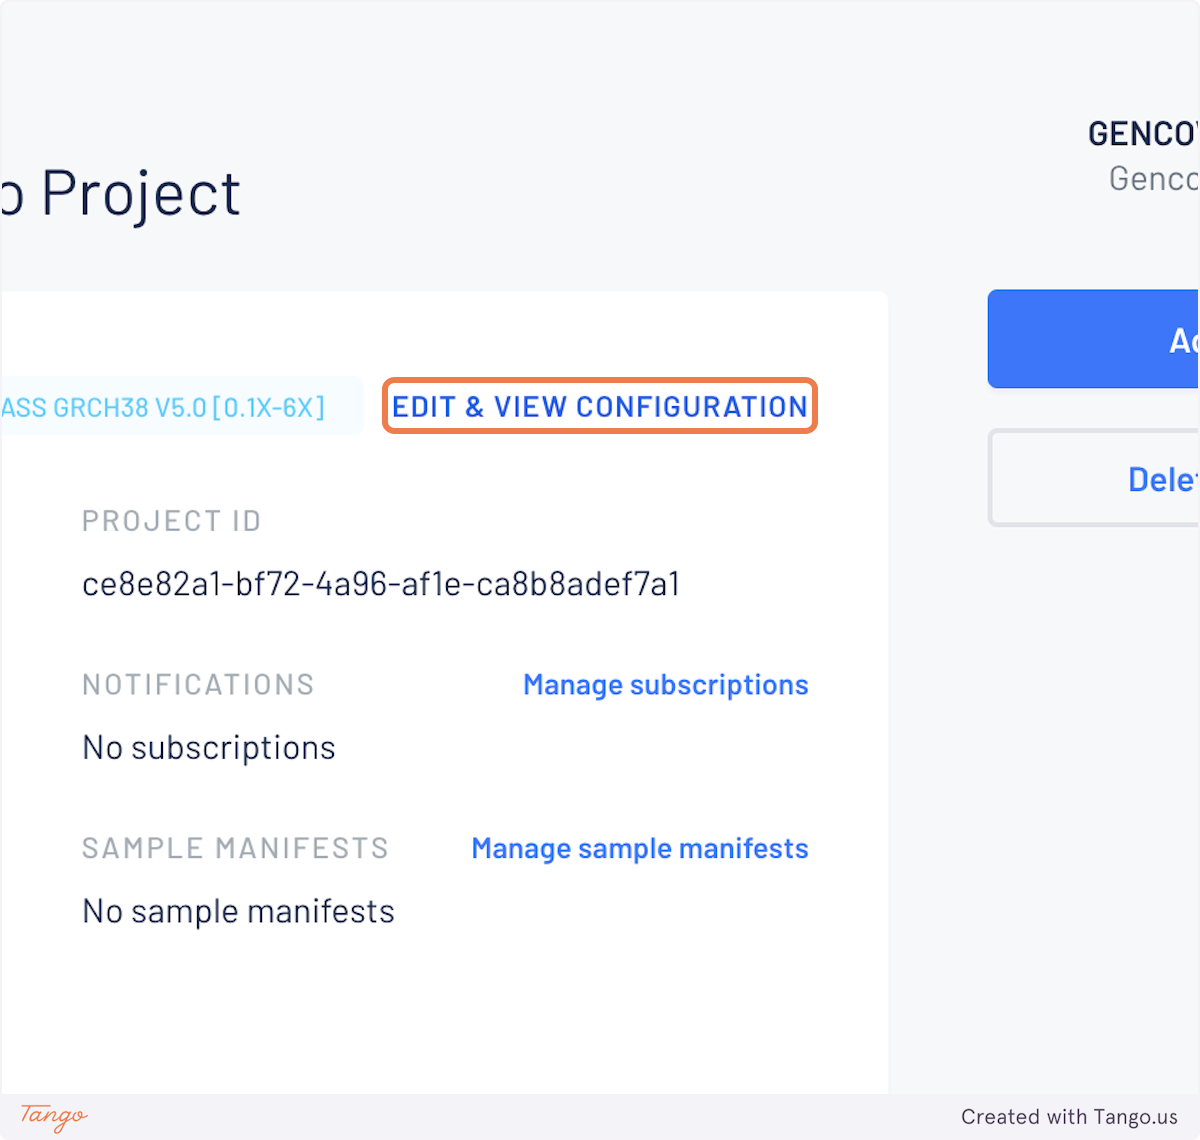 Click on the Gencove project which utilizes the configuration you are interested in better understanding. Within the project page, click on EDIT & VIEW CONFIGURATION